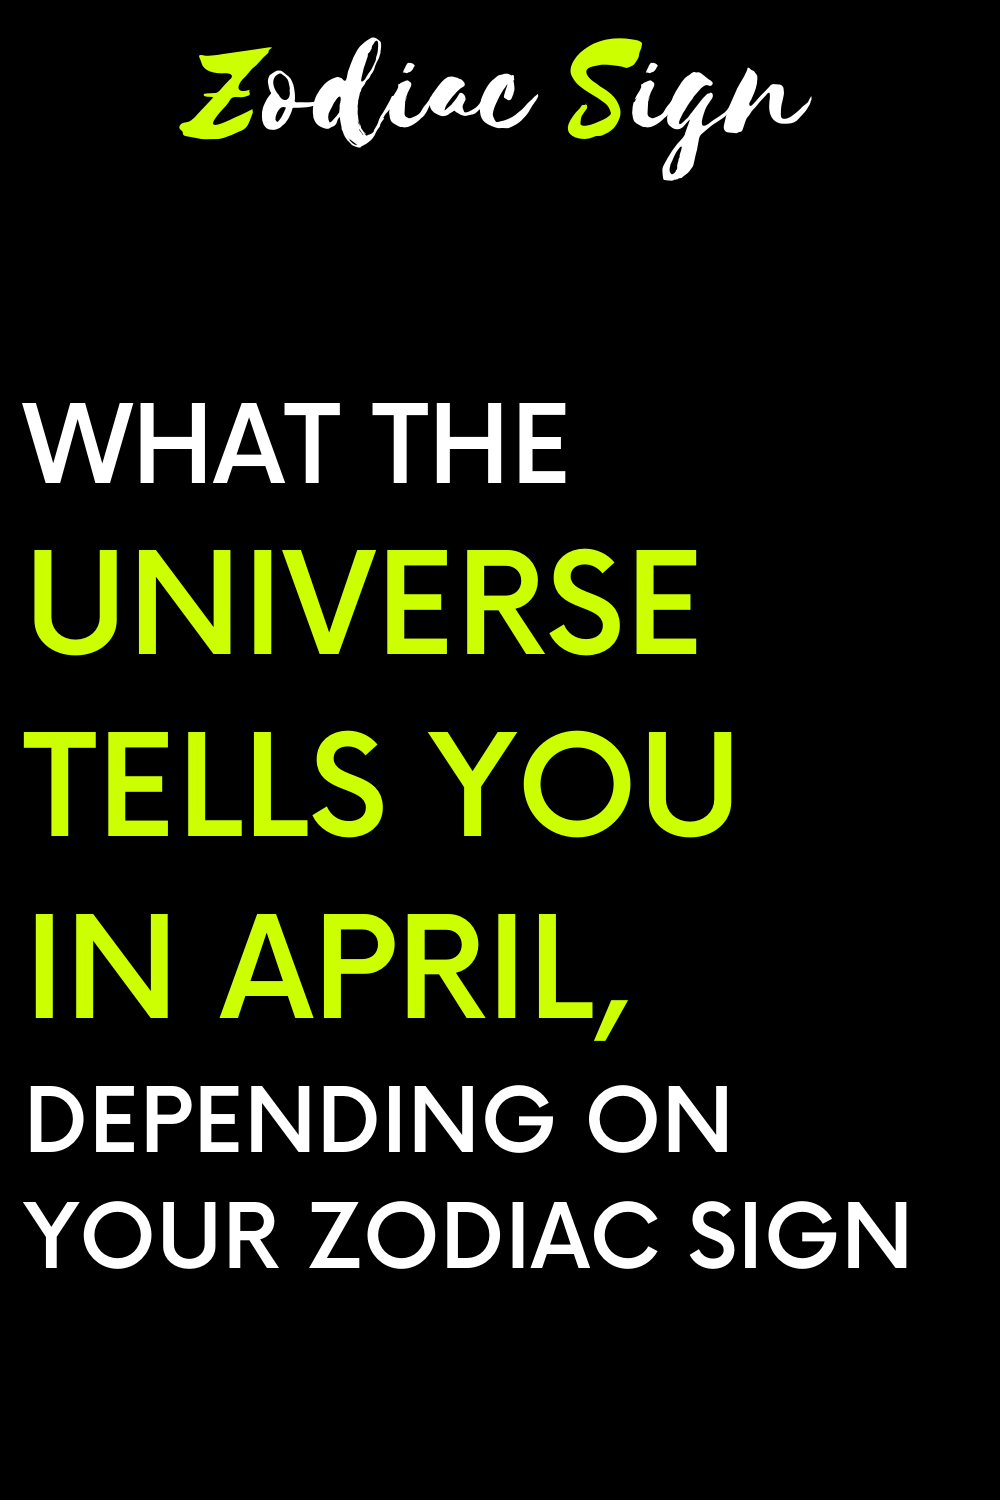 What the Universe tells you in April, depending on your zodiac sign